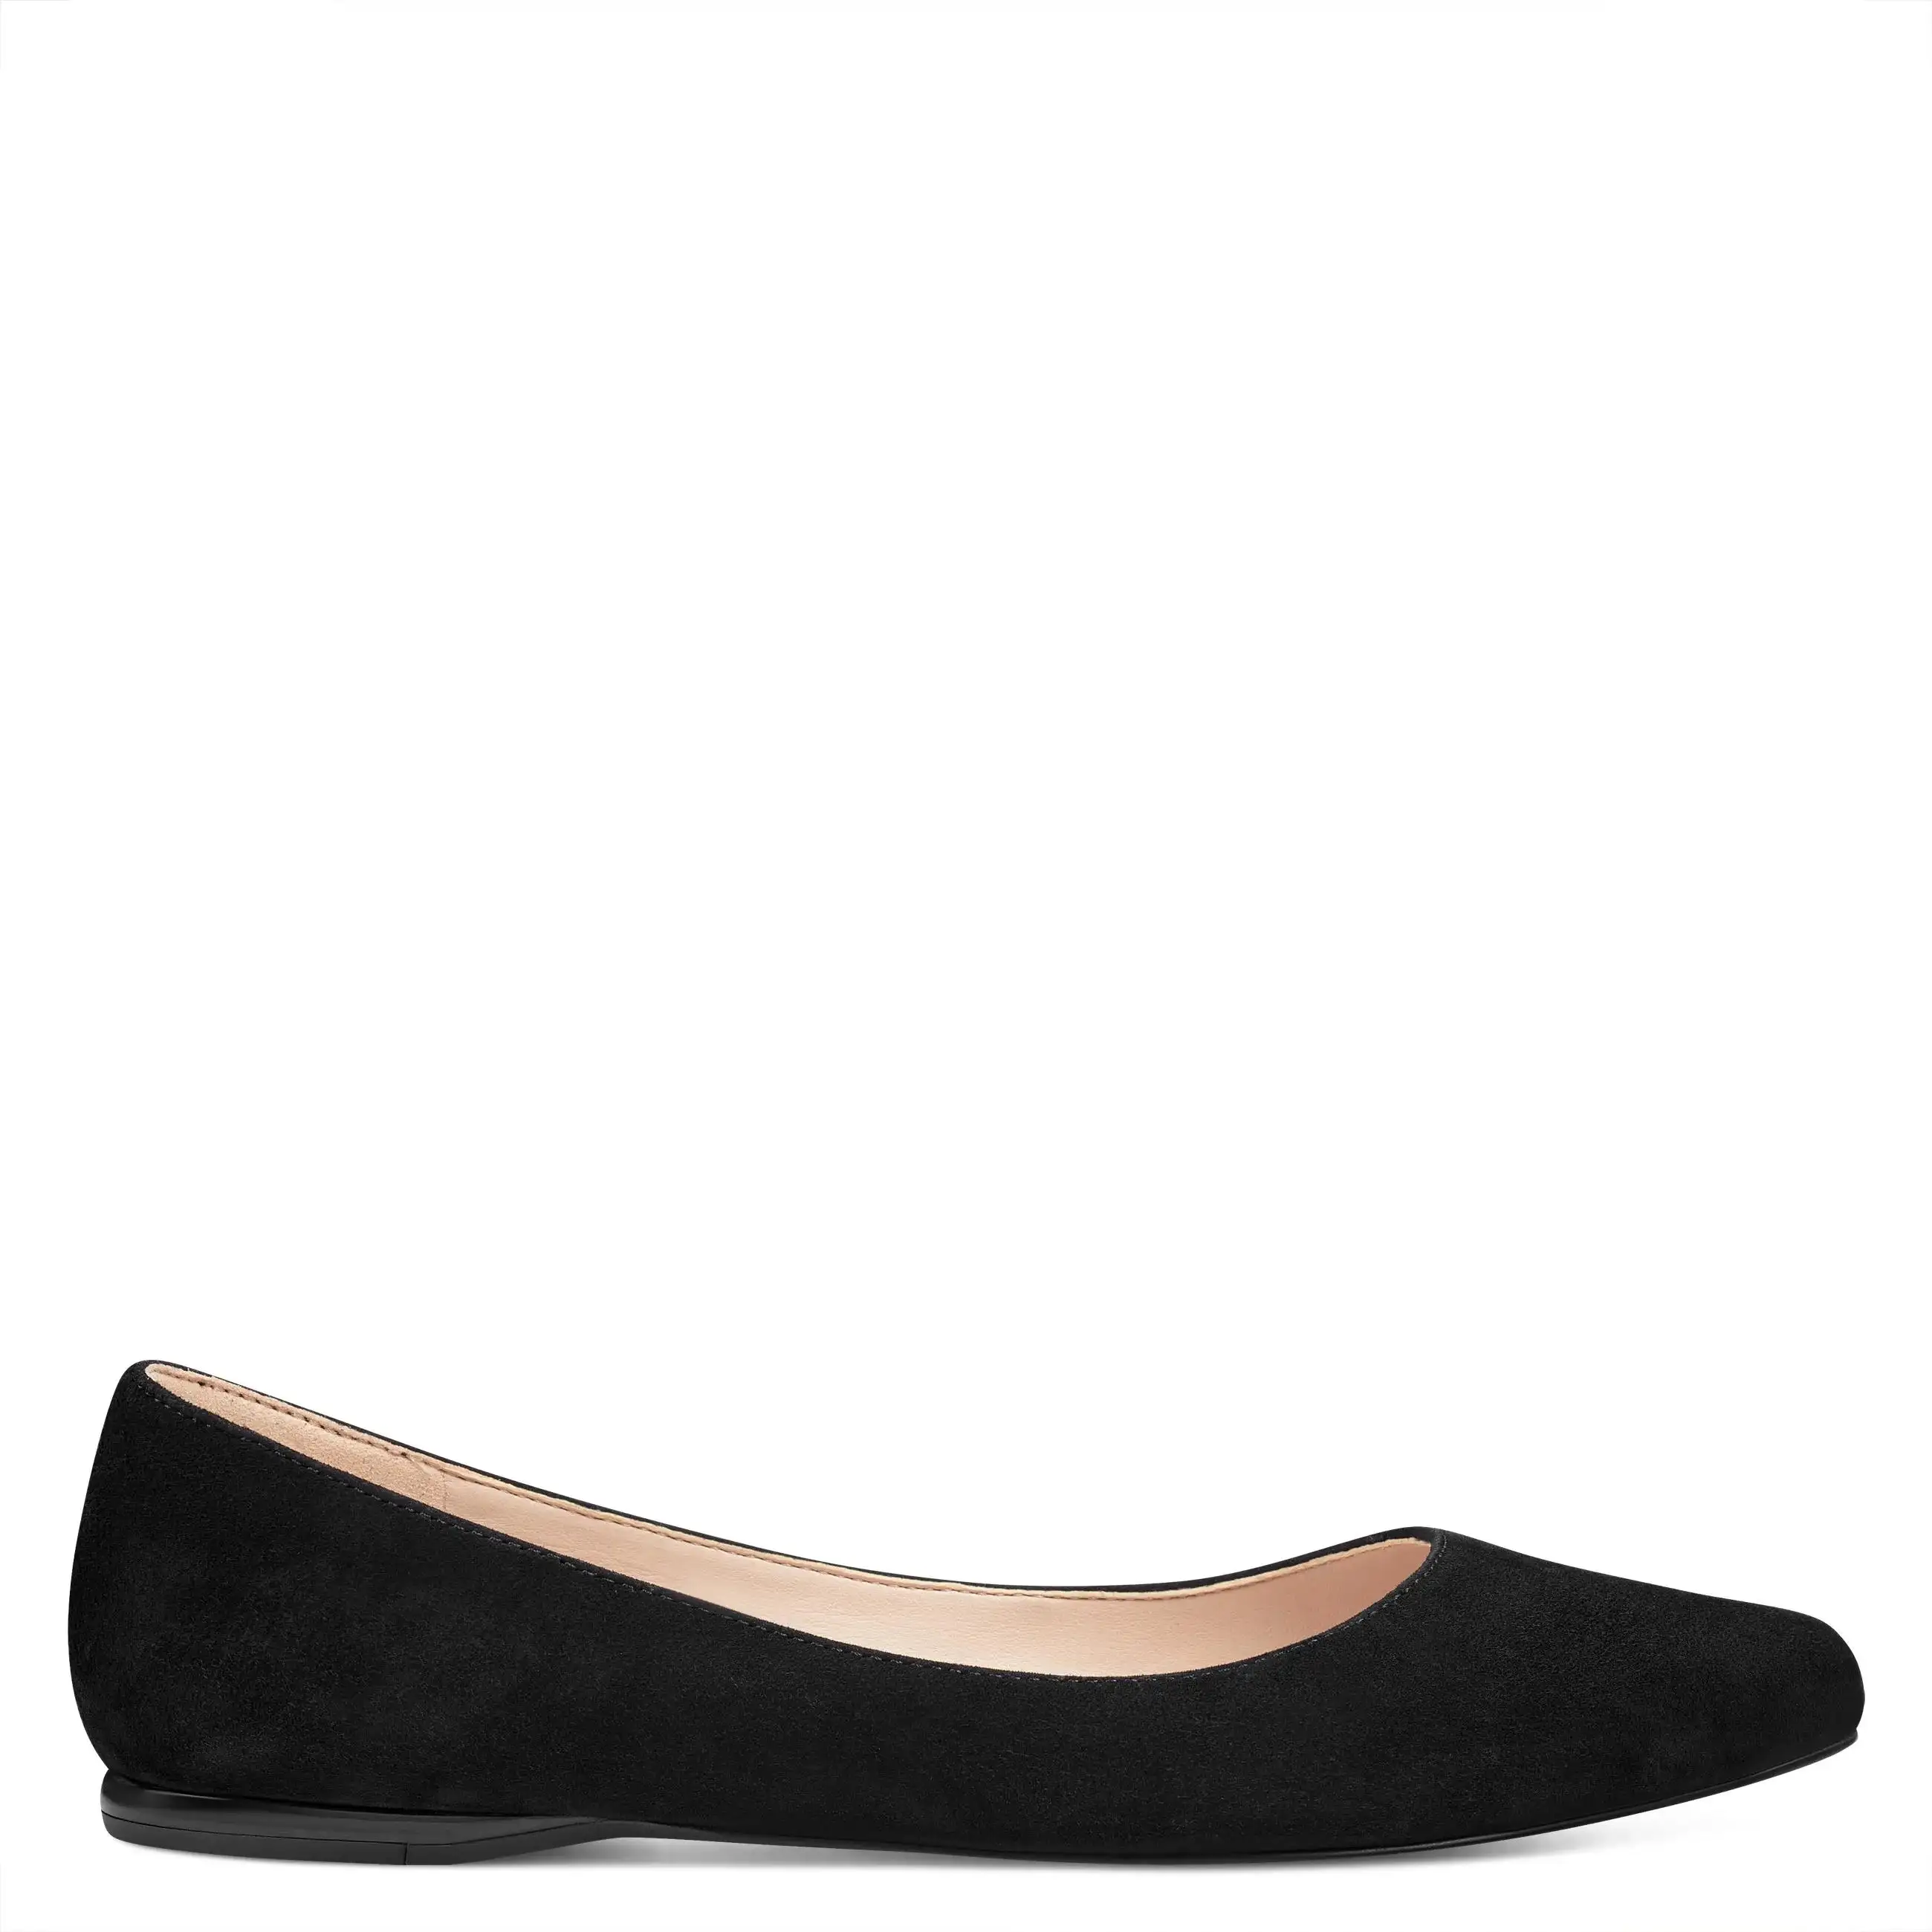 black faux suede point toe flats for women and laddies women loafers